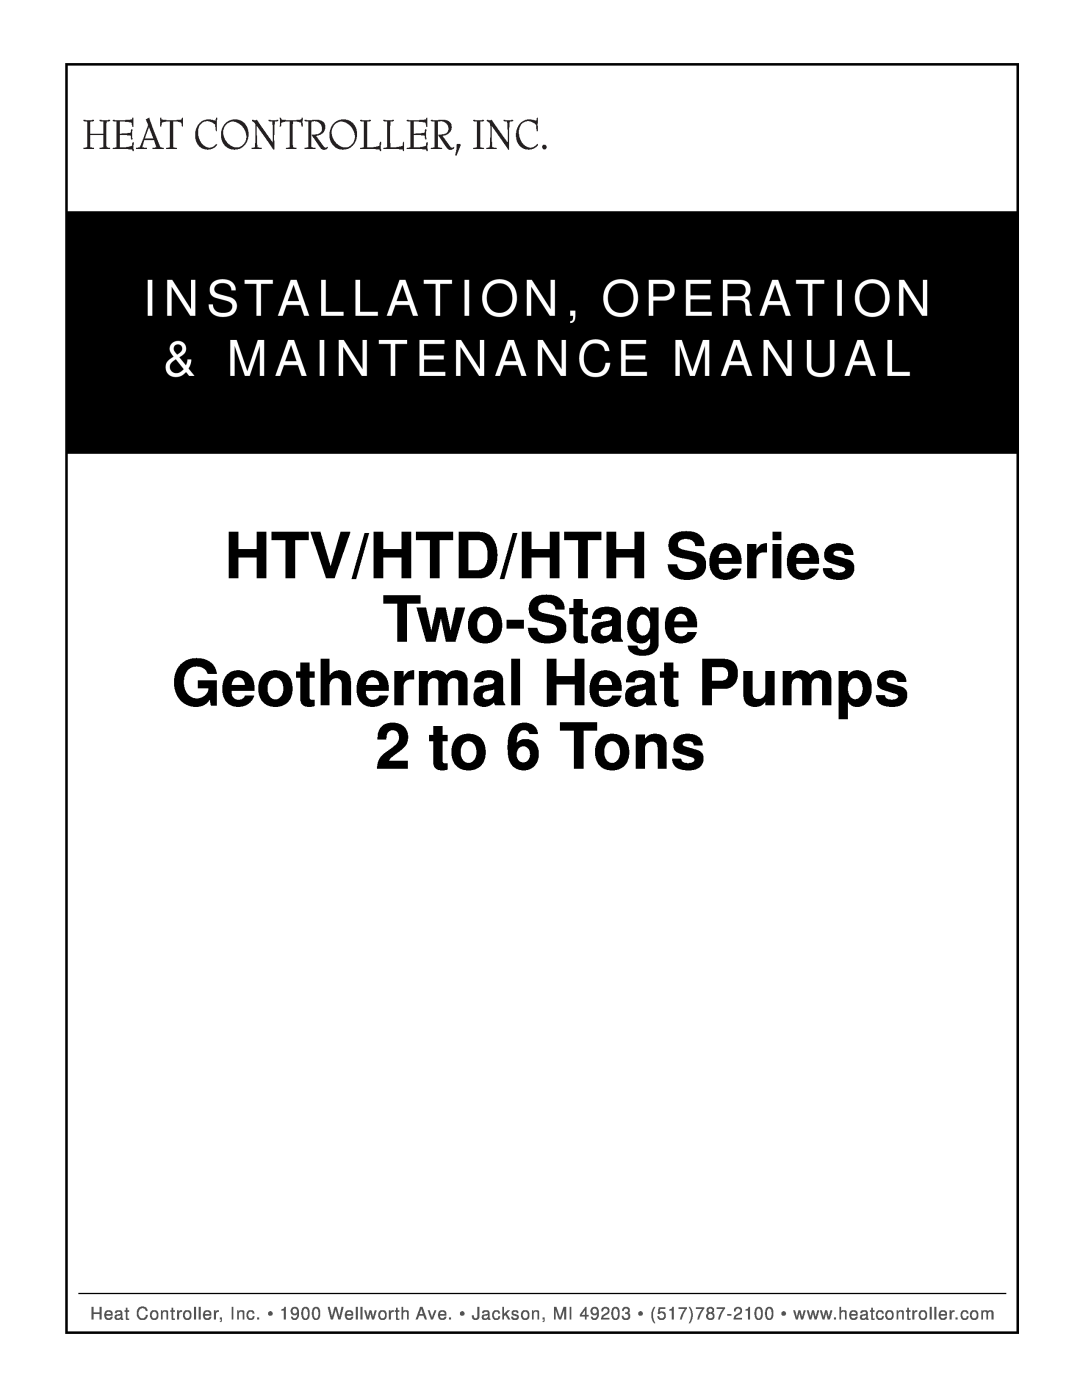 Heat Controller manual HTV/HTD/HTH Series Two-Stage, Geothermal Heat Pumps 2 to 6 Tons 